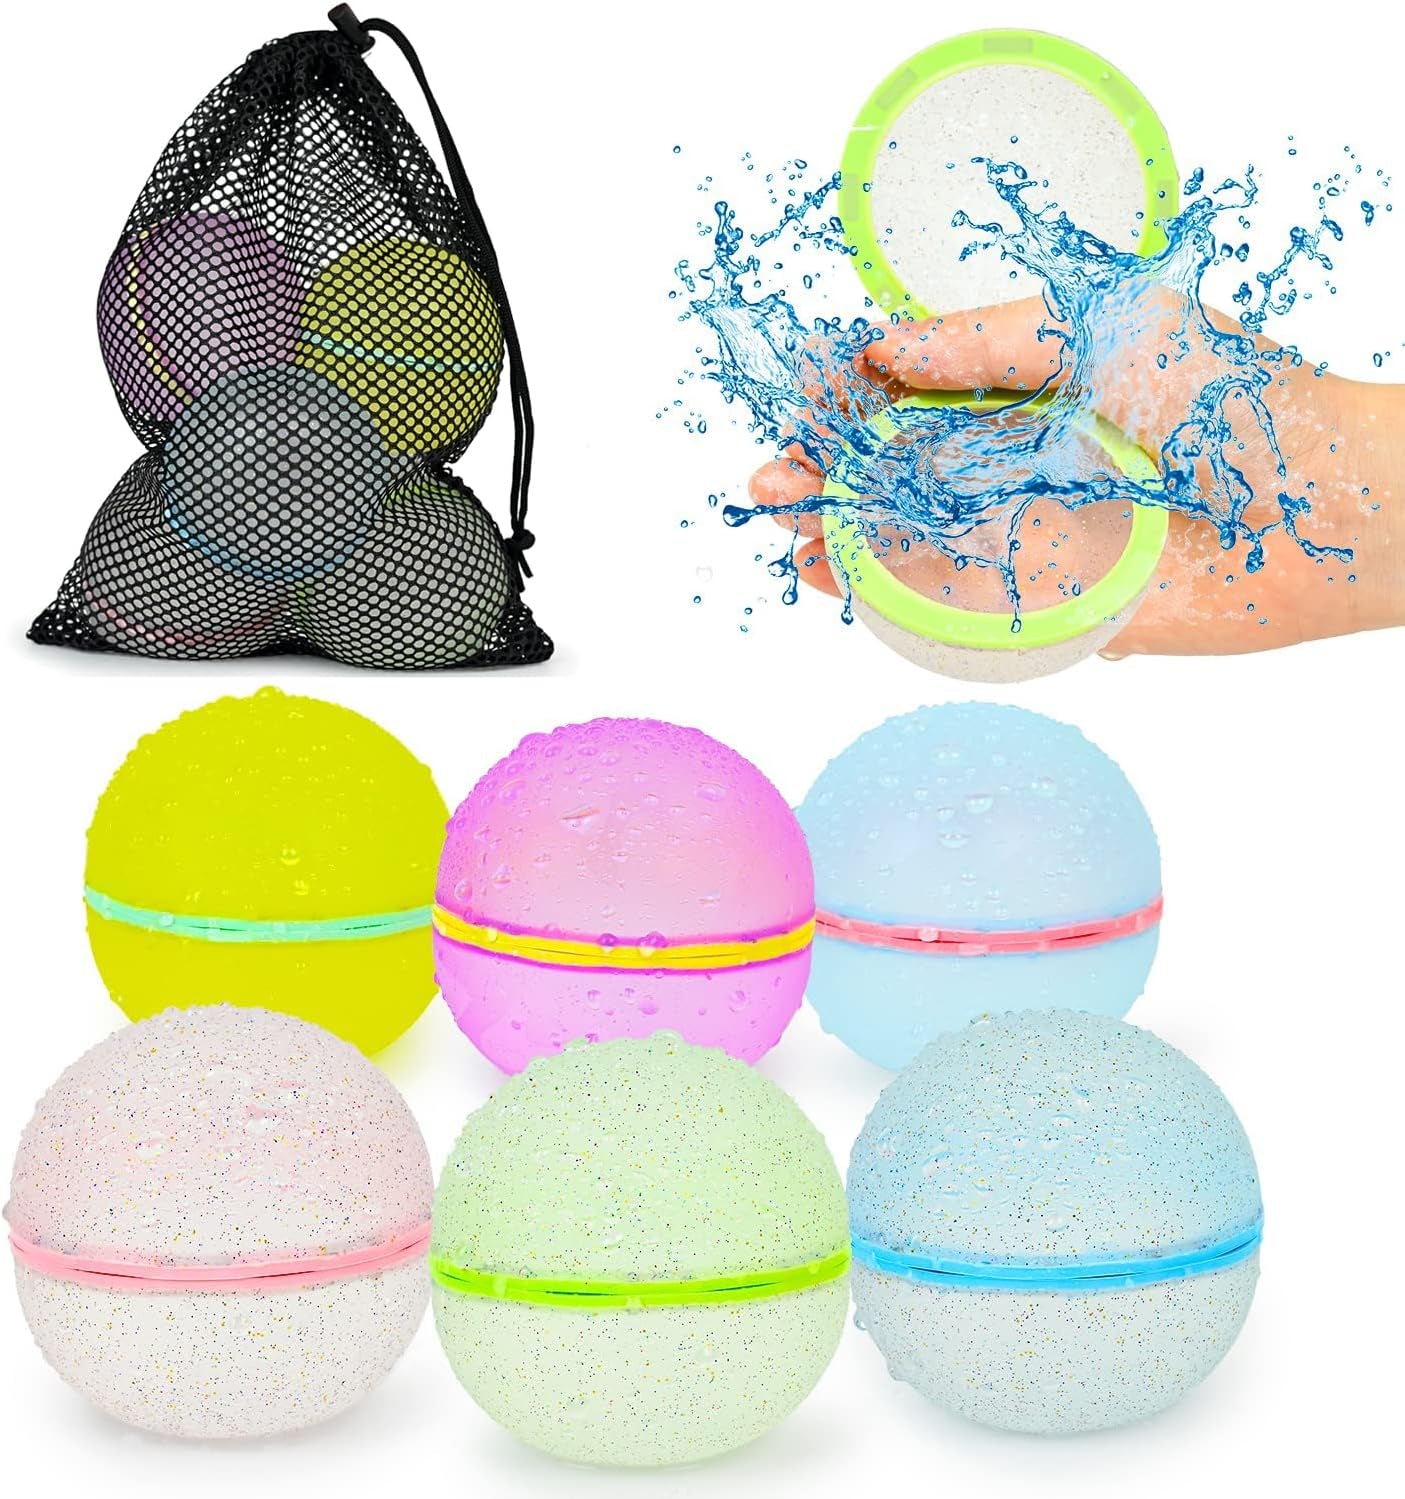 Reusable Water Balloons 12Pcs with Mesh Bag, Self Sealing Silicone Ball Latex-Free, No Clean Hassle, Easy to Fill, Summer Toys Water Toy Swimming Pool Beach Park Yard Outdoor Games Party Supplies